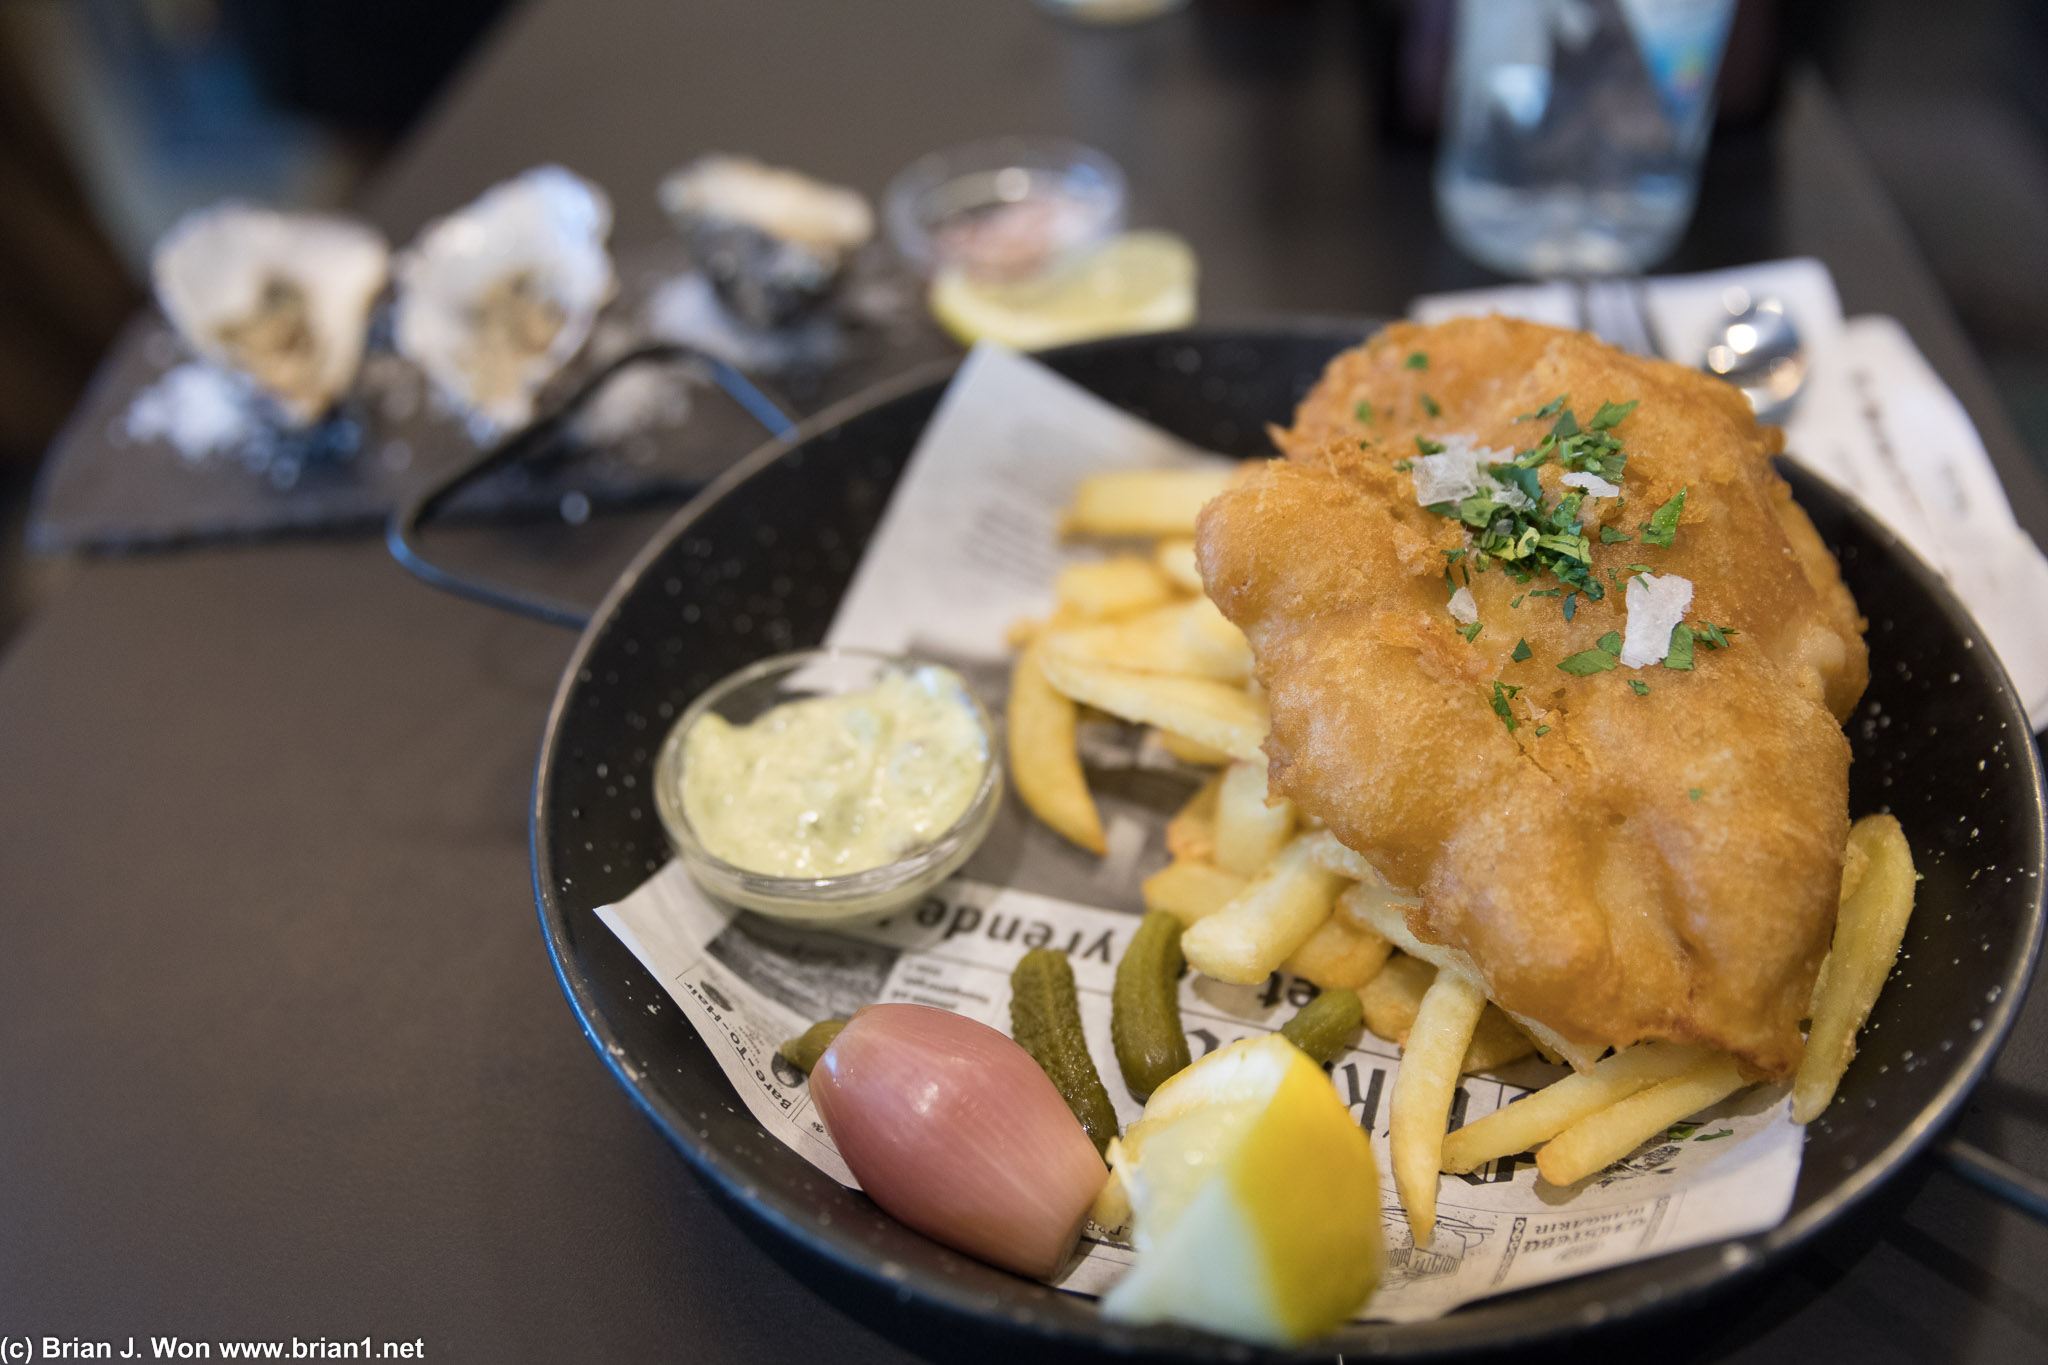 Fish and chips, plus oysters!